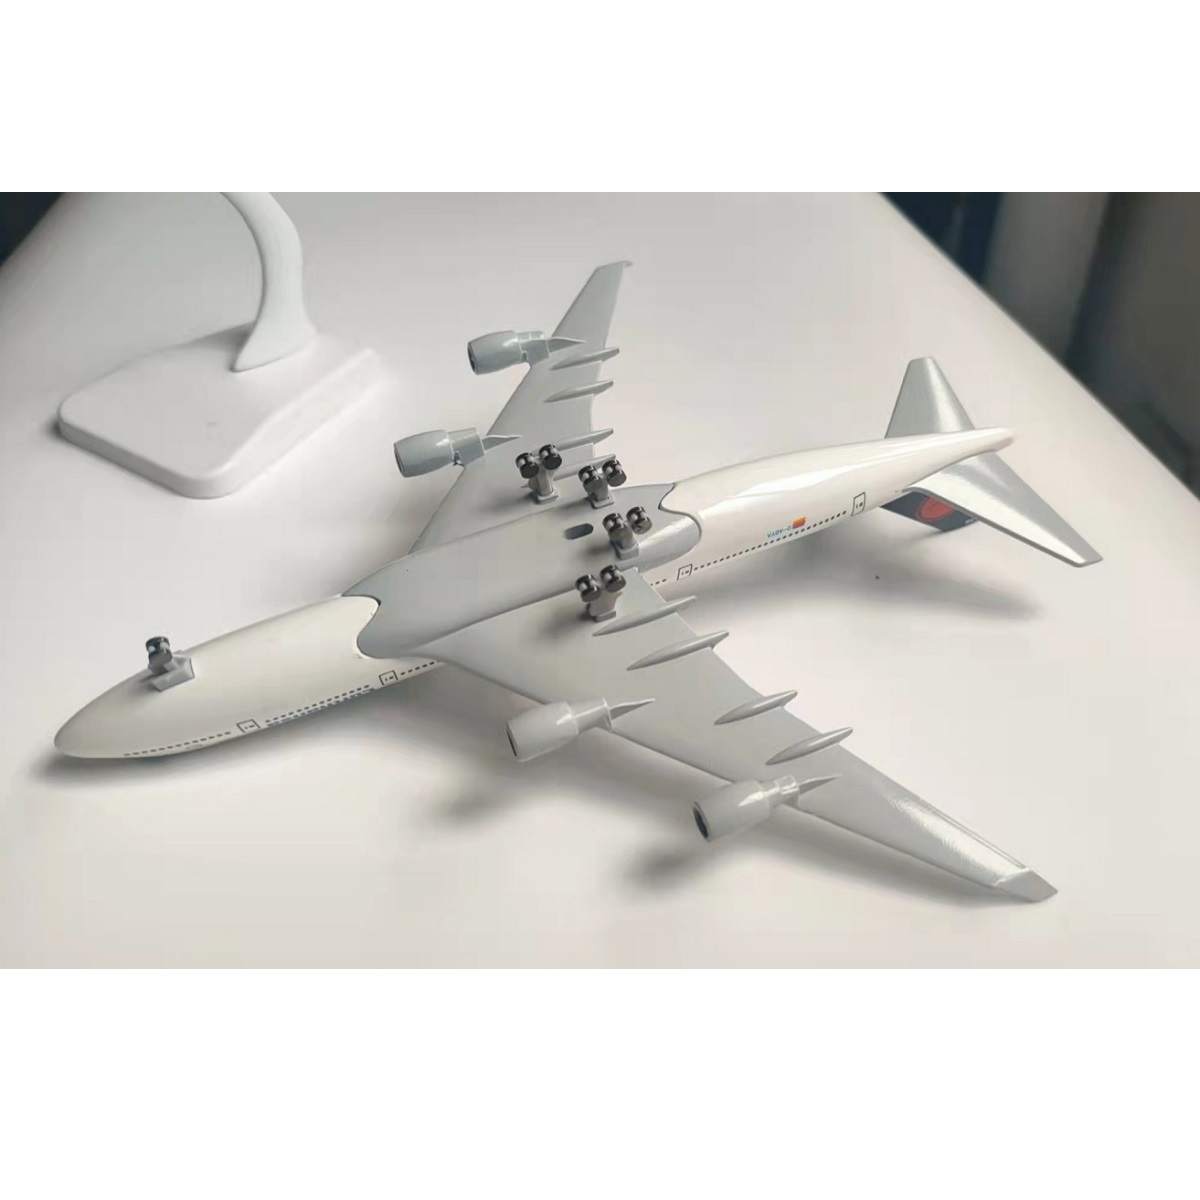 Lufthansa Airbus A380 Replica Toy Model with Stand